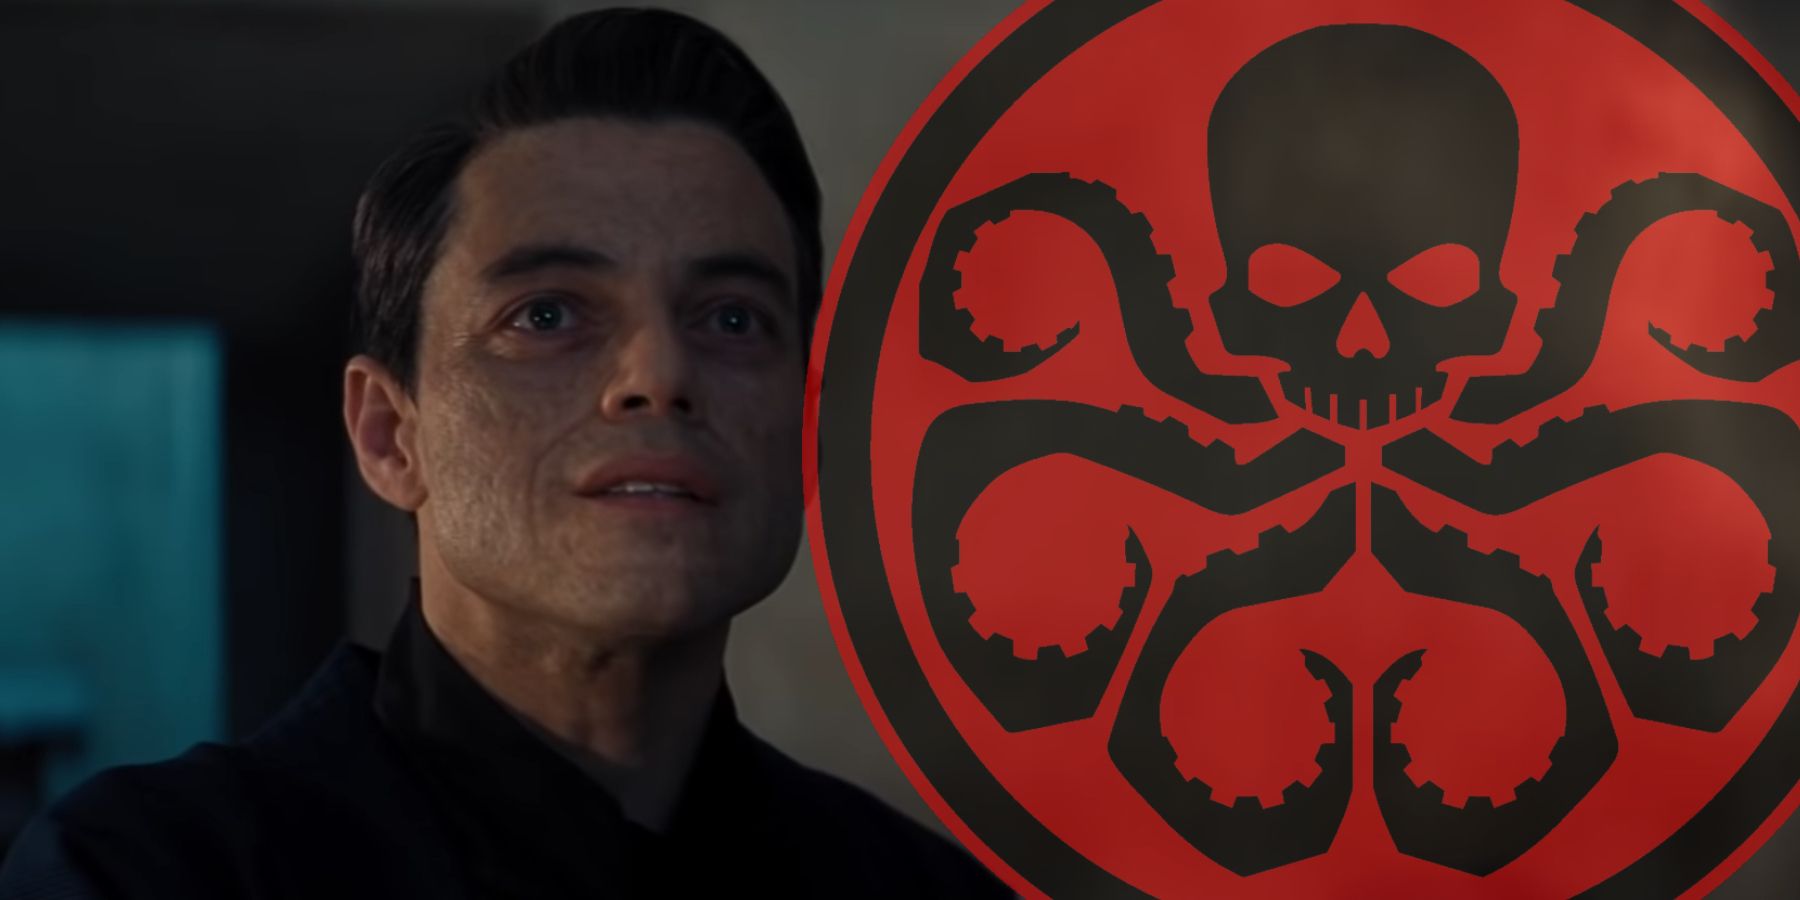 No Time to Die's Safin and the MCU's Hydra.